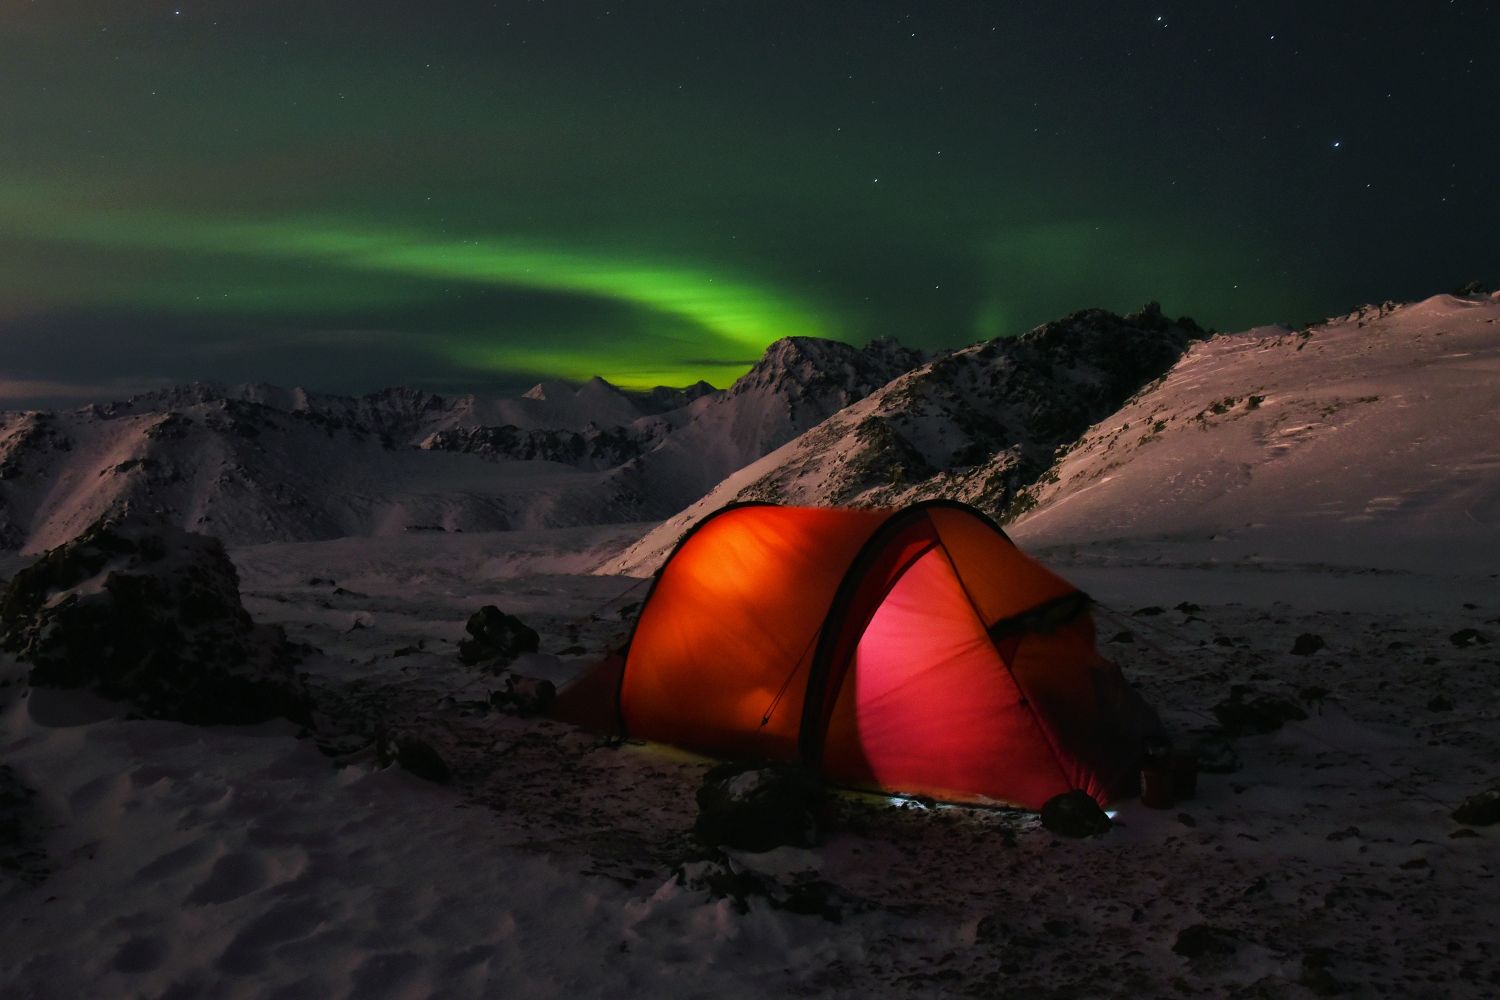 An illuminated tent in the snow, below the northern lights.